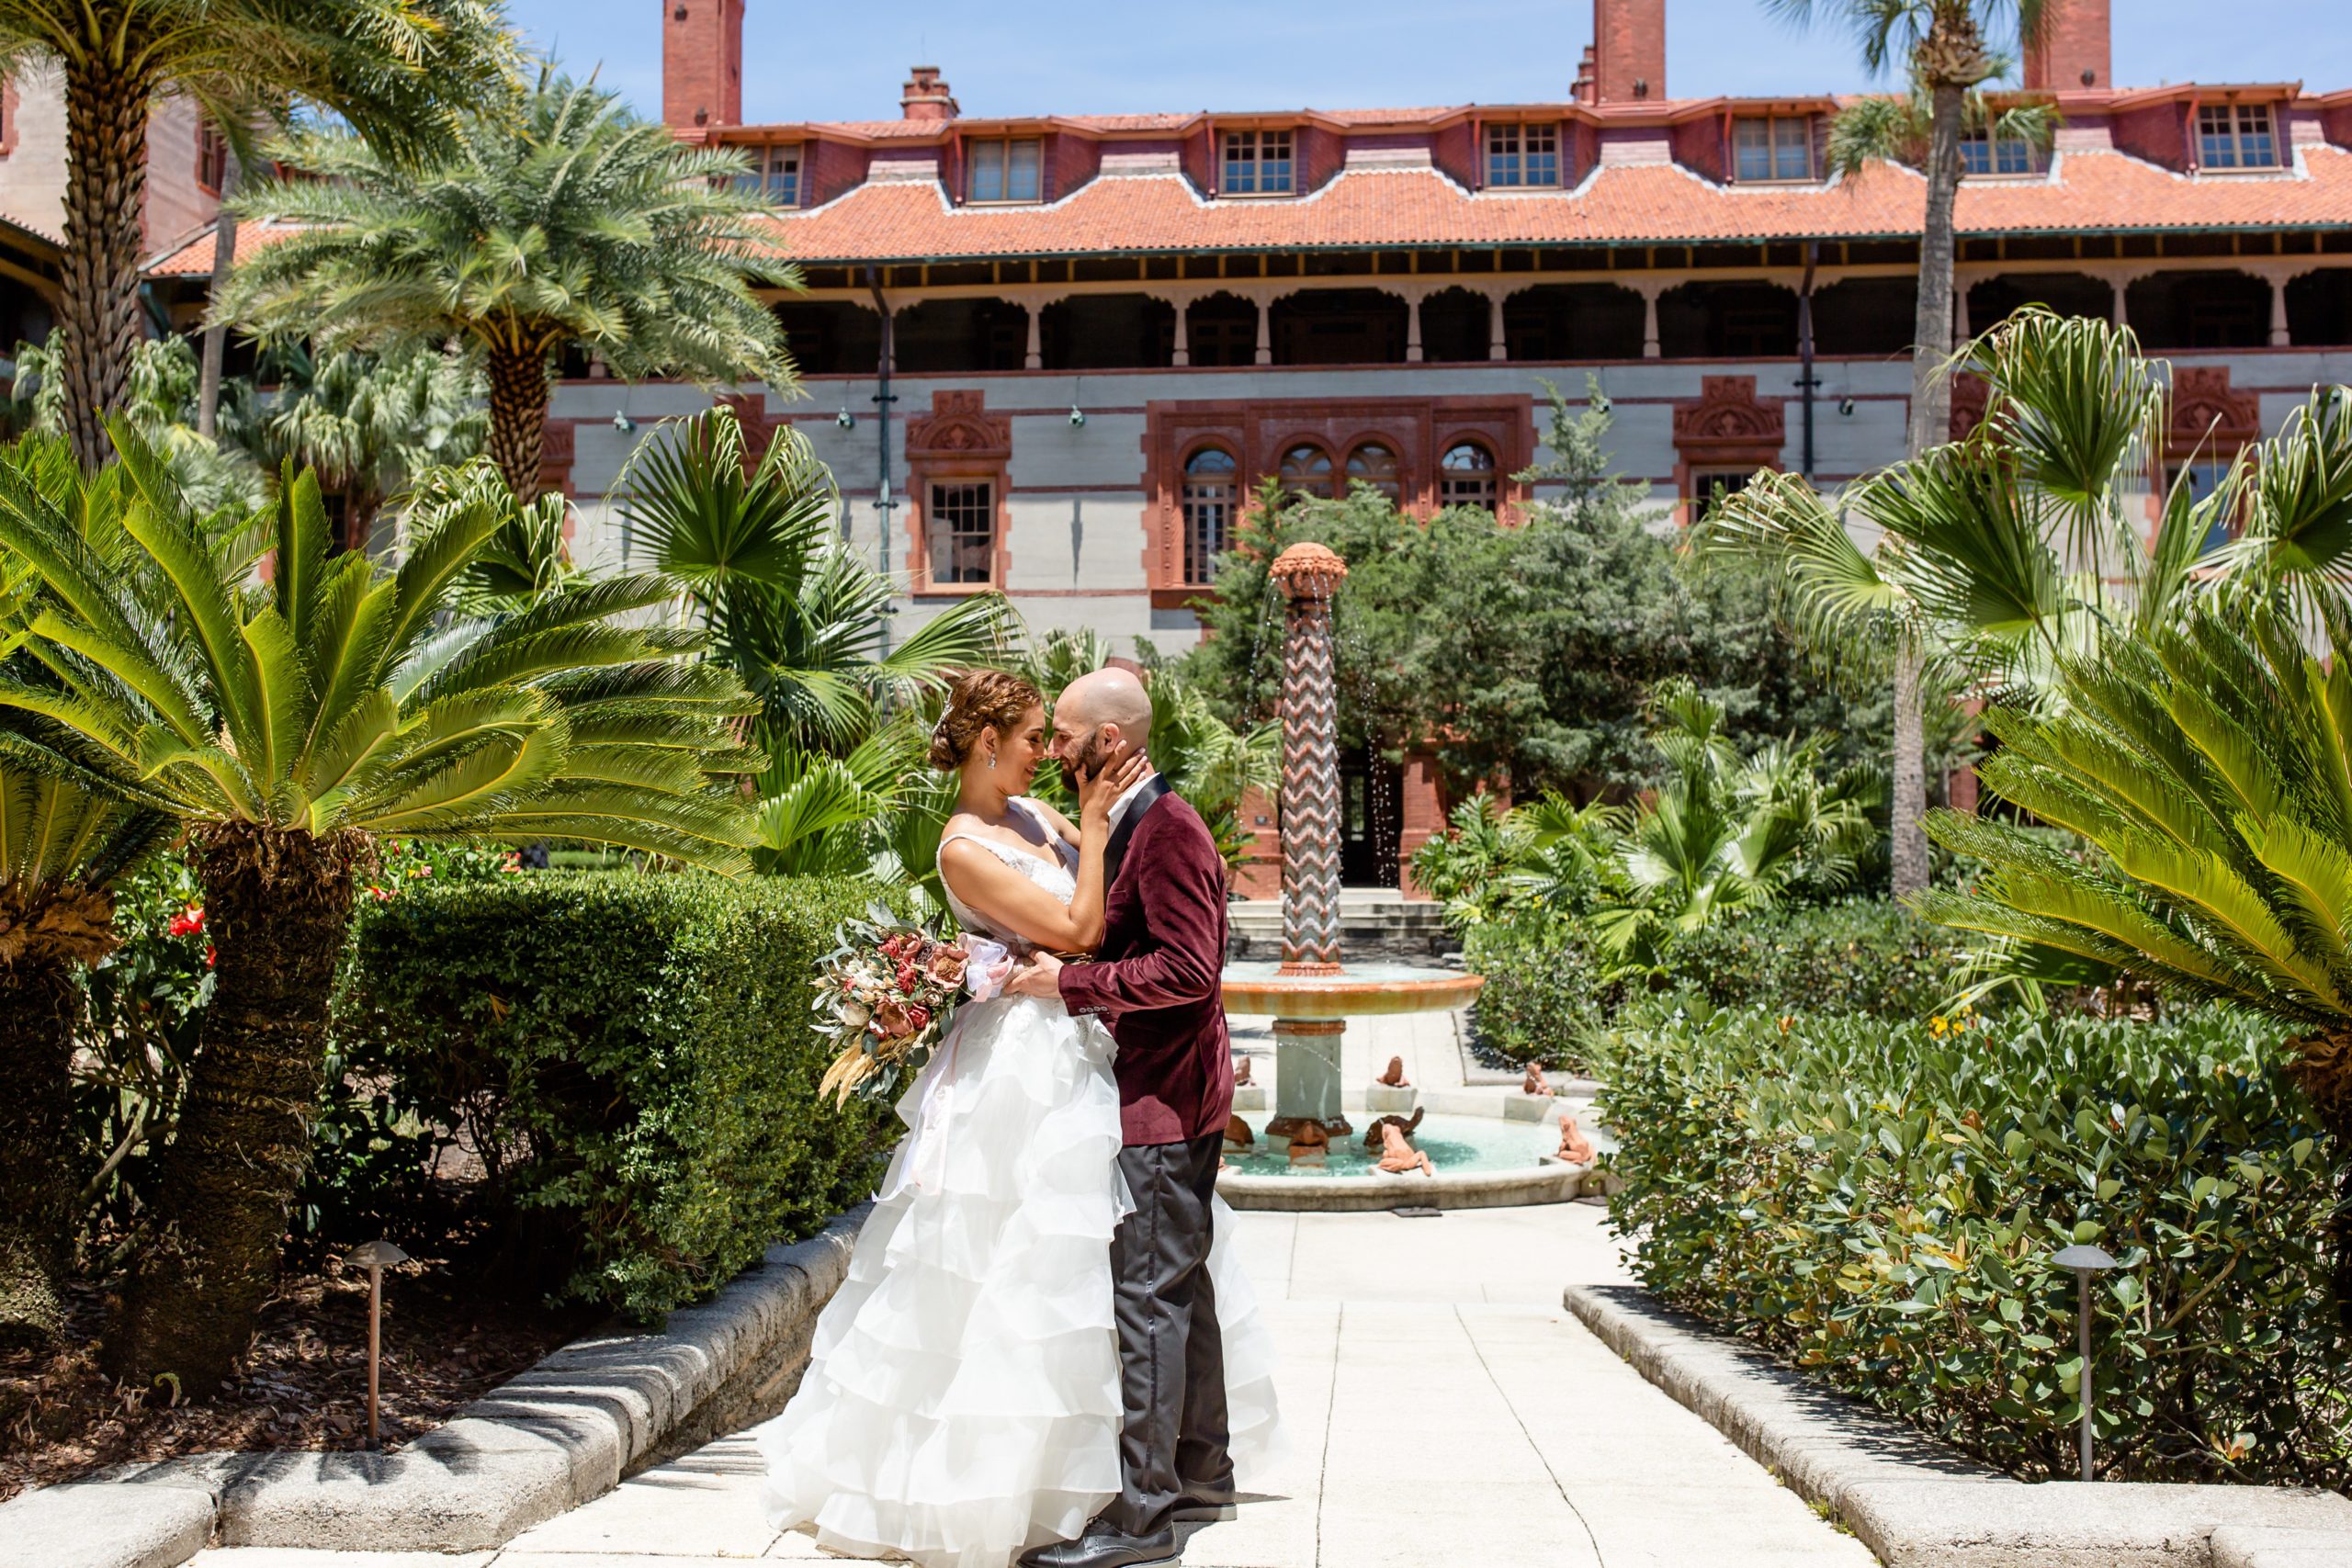 Flagler College Wedding Photo — Bride and Groom kissing in front of beautiful fountain and palm trees in courtyard